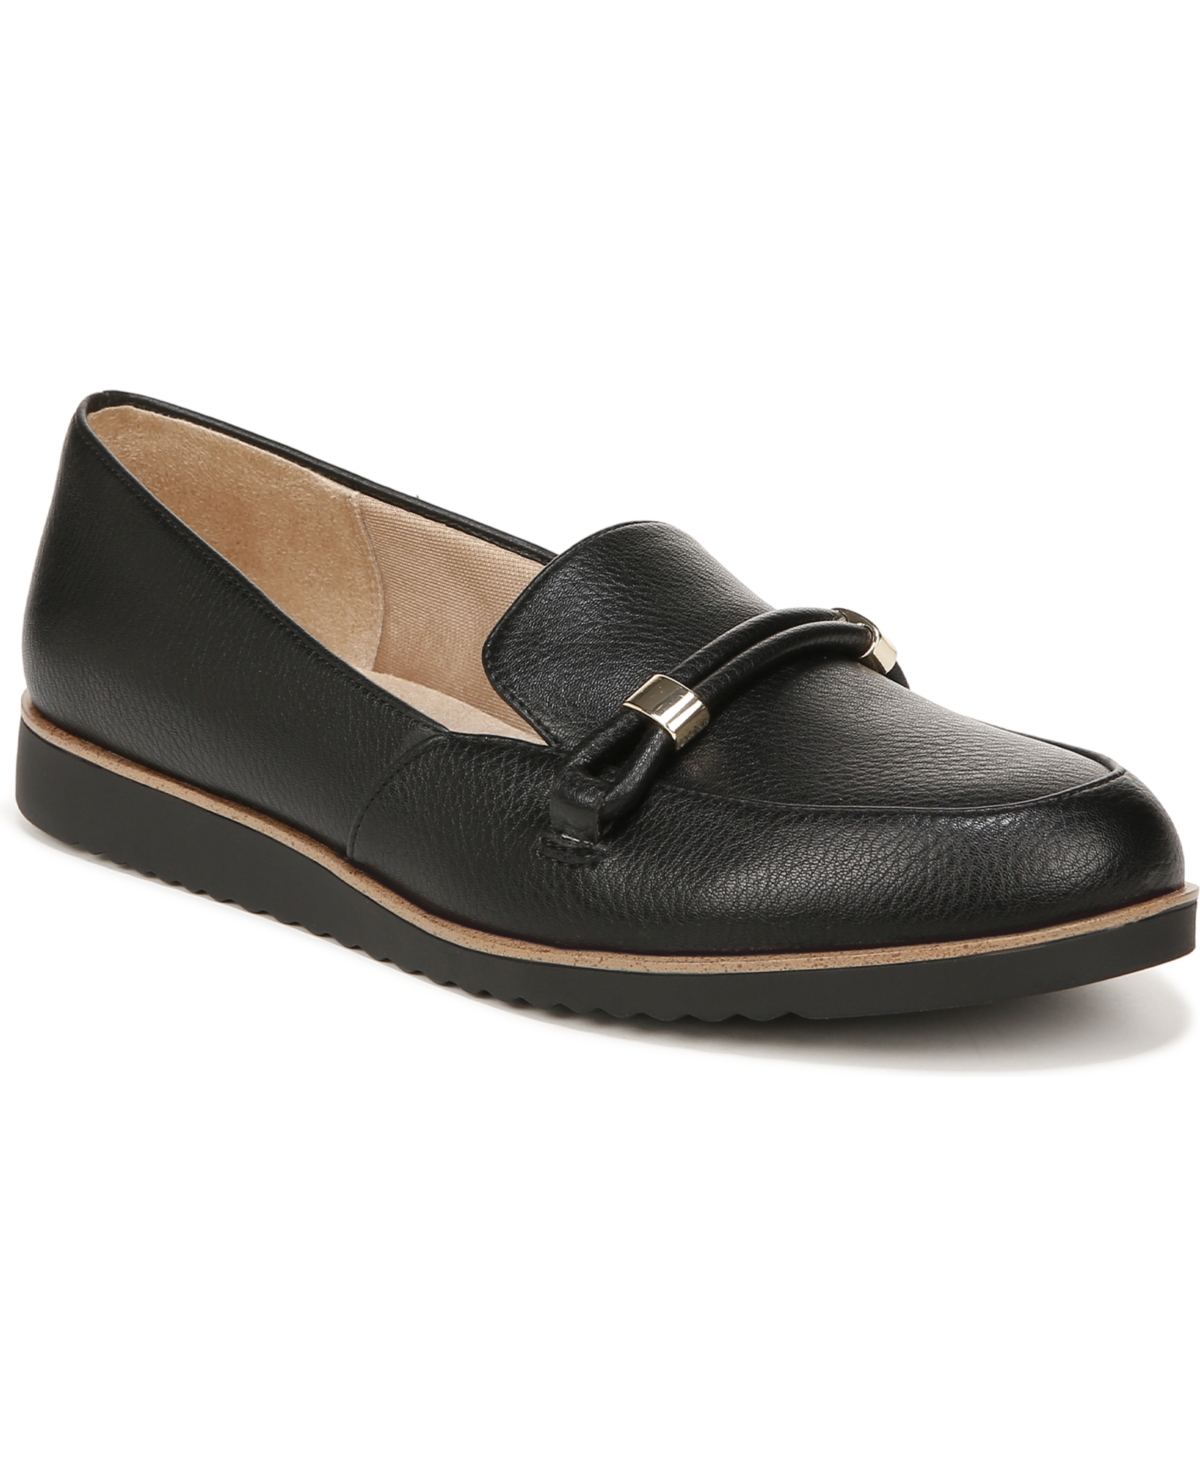 Zahara Slip Ons - Chocolate Brown Faux Leather